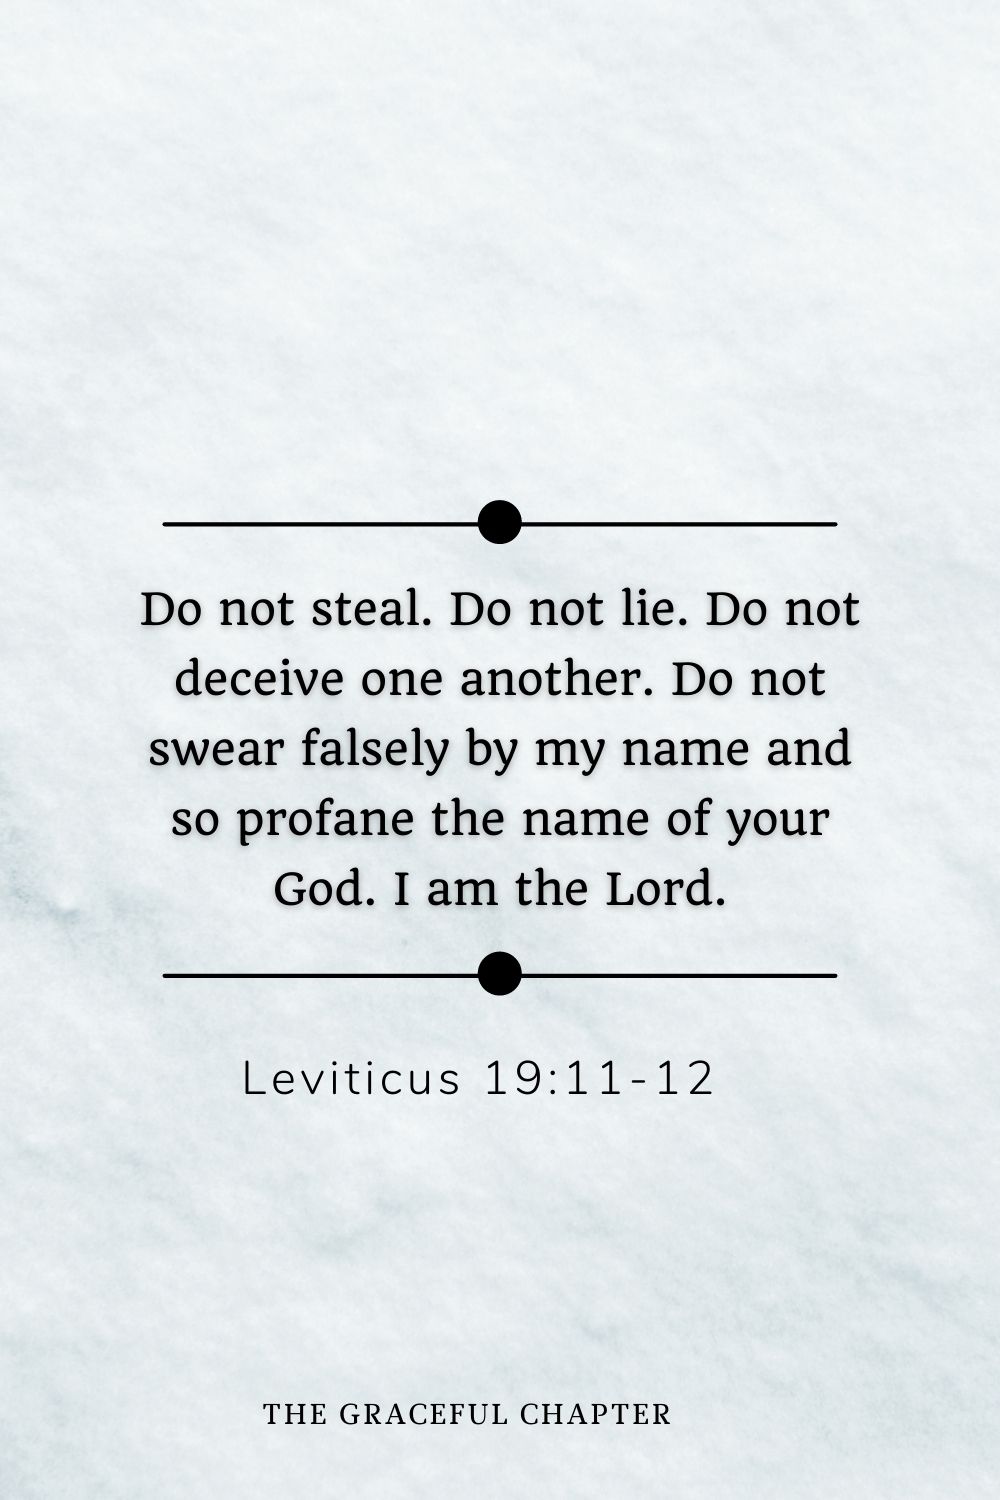 Do not steal. Do not lie. Do not deceive one another. Do not swear falsely by my name and so profane the name of your God. I am the Lord. Leviticus 19:11-12